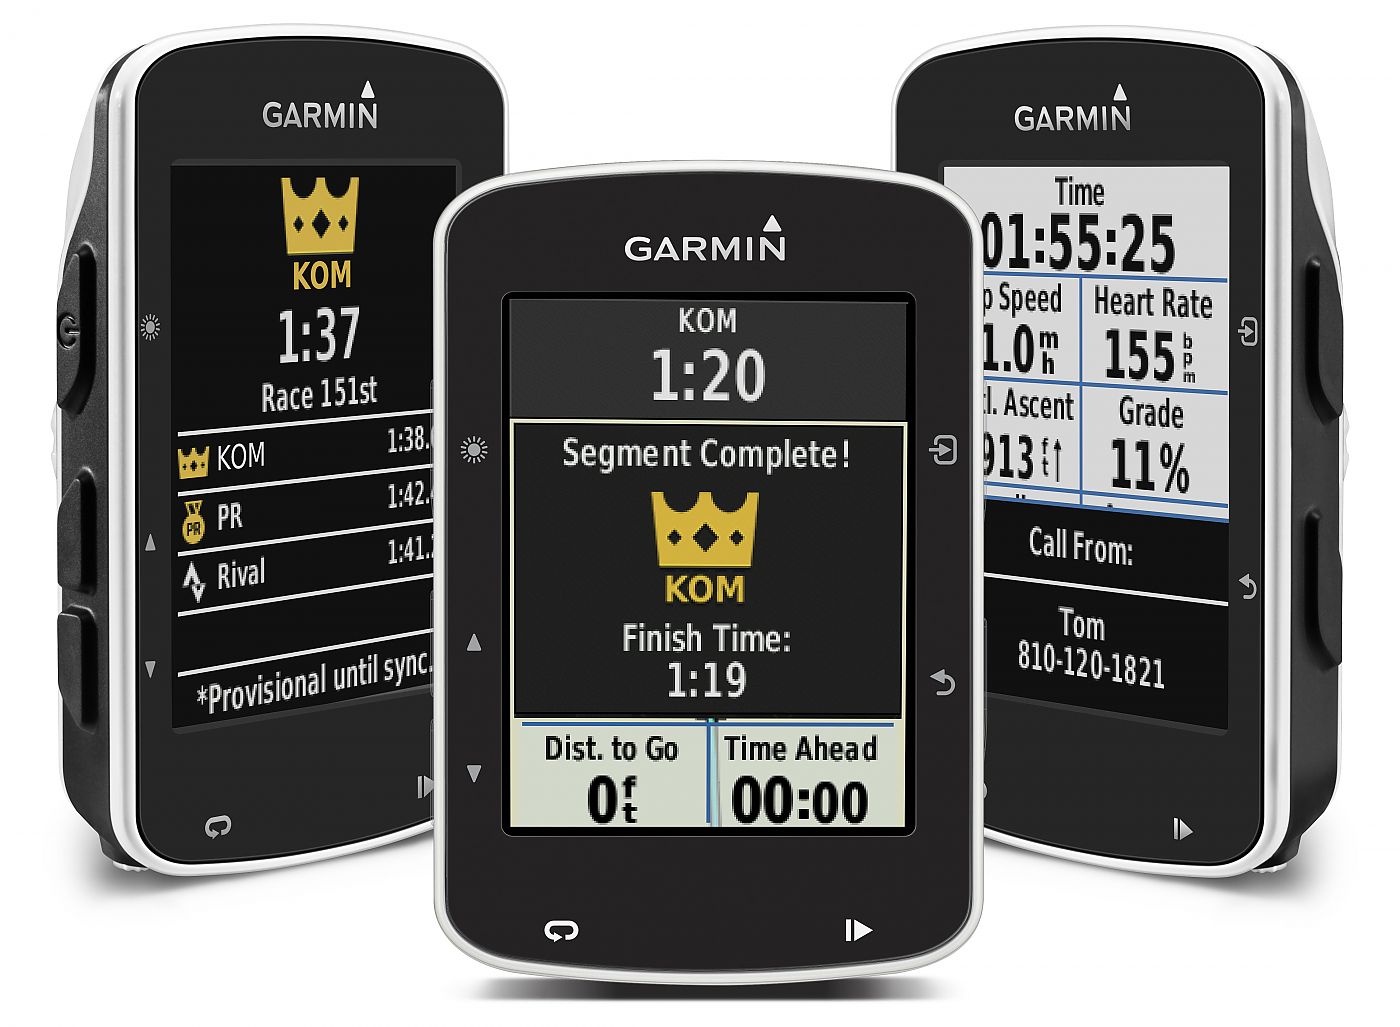 Garmin launches bike radar, bike lights and new unit with live Strava display | Bicycle Retailer and Industry News